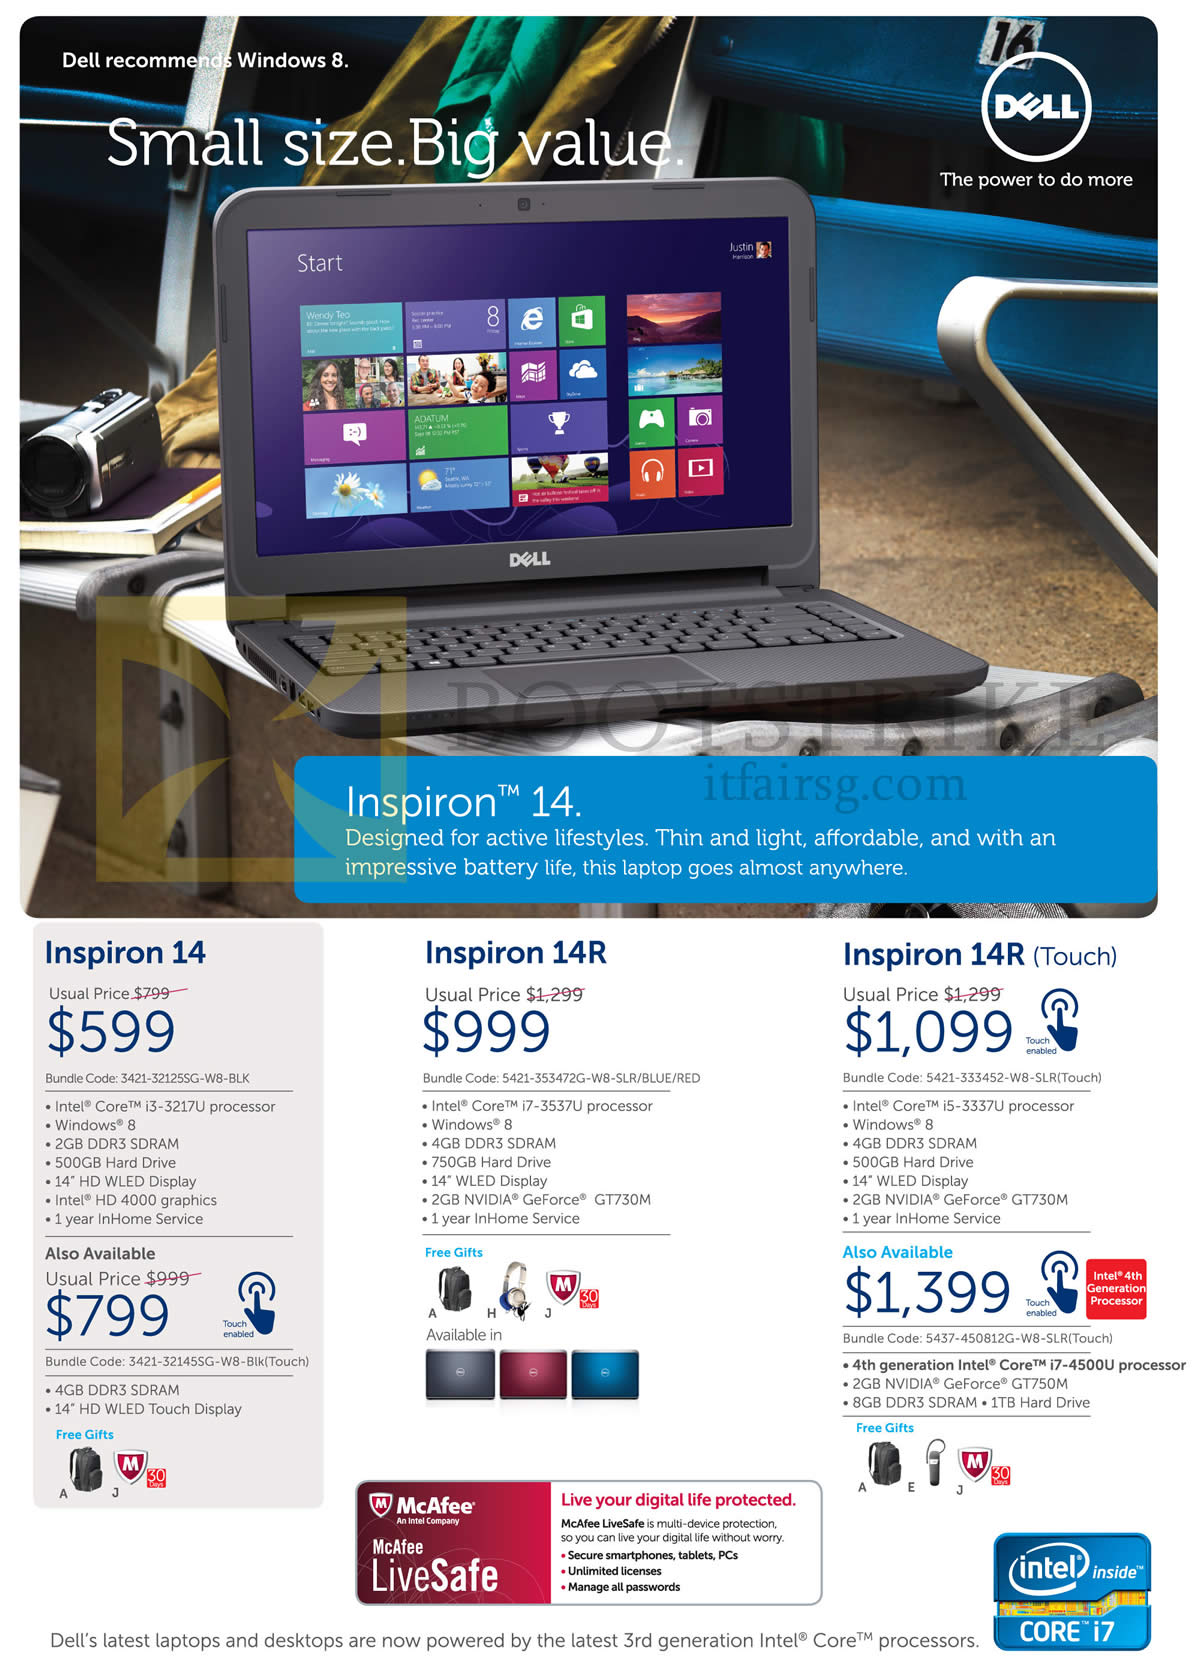 COMEX 2013 price list image brochure of Dell Notebooks Inspiron 14, Inspiron 1rR